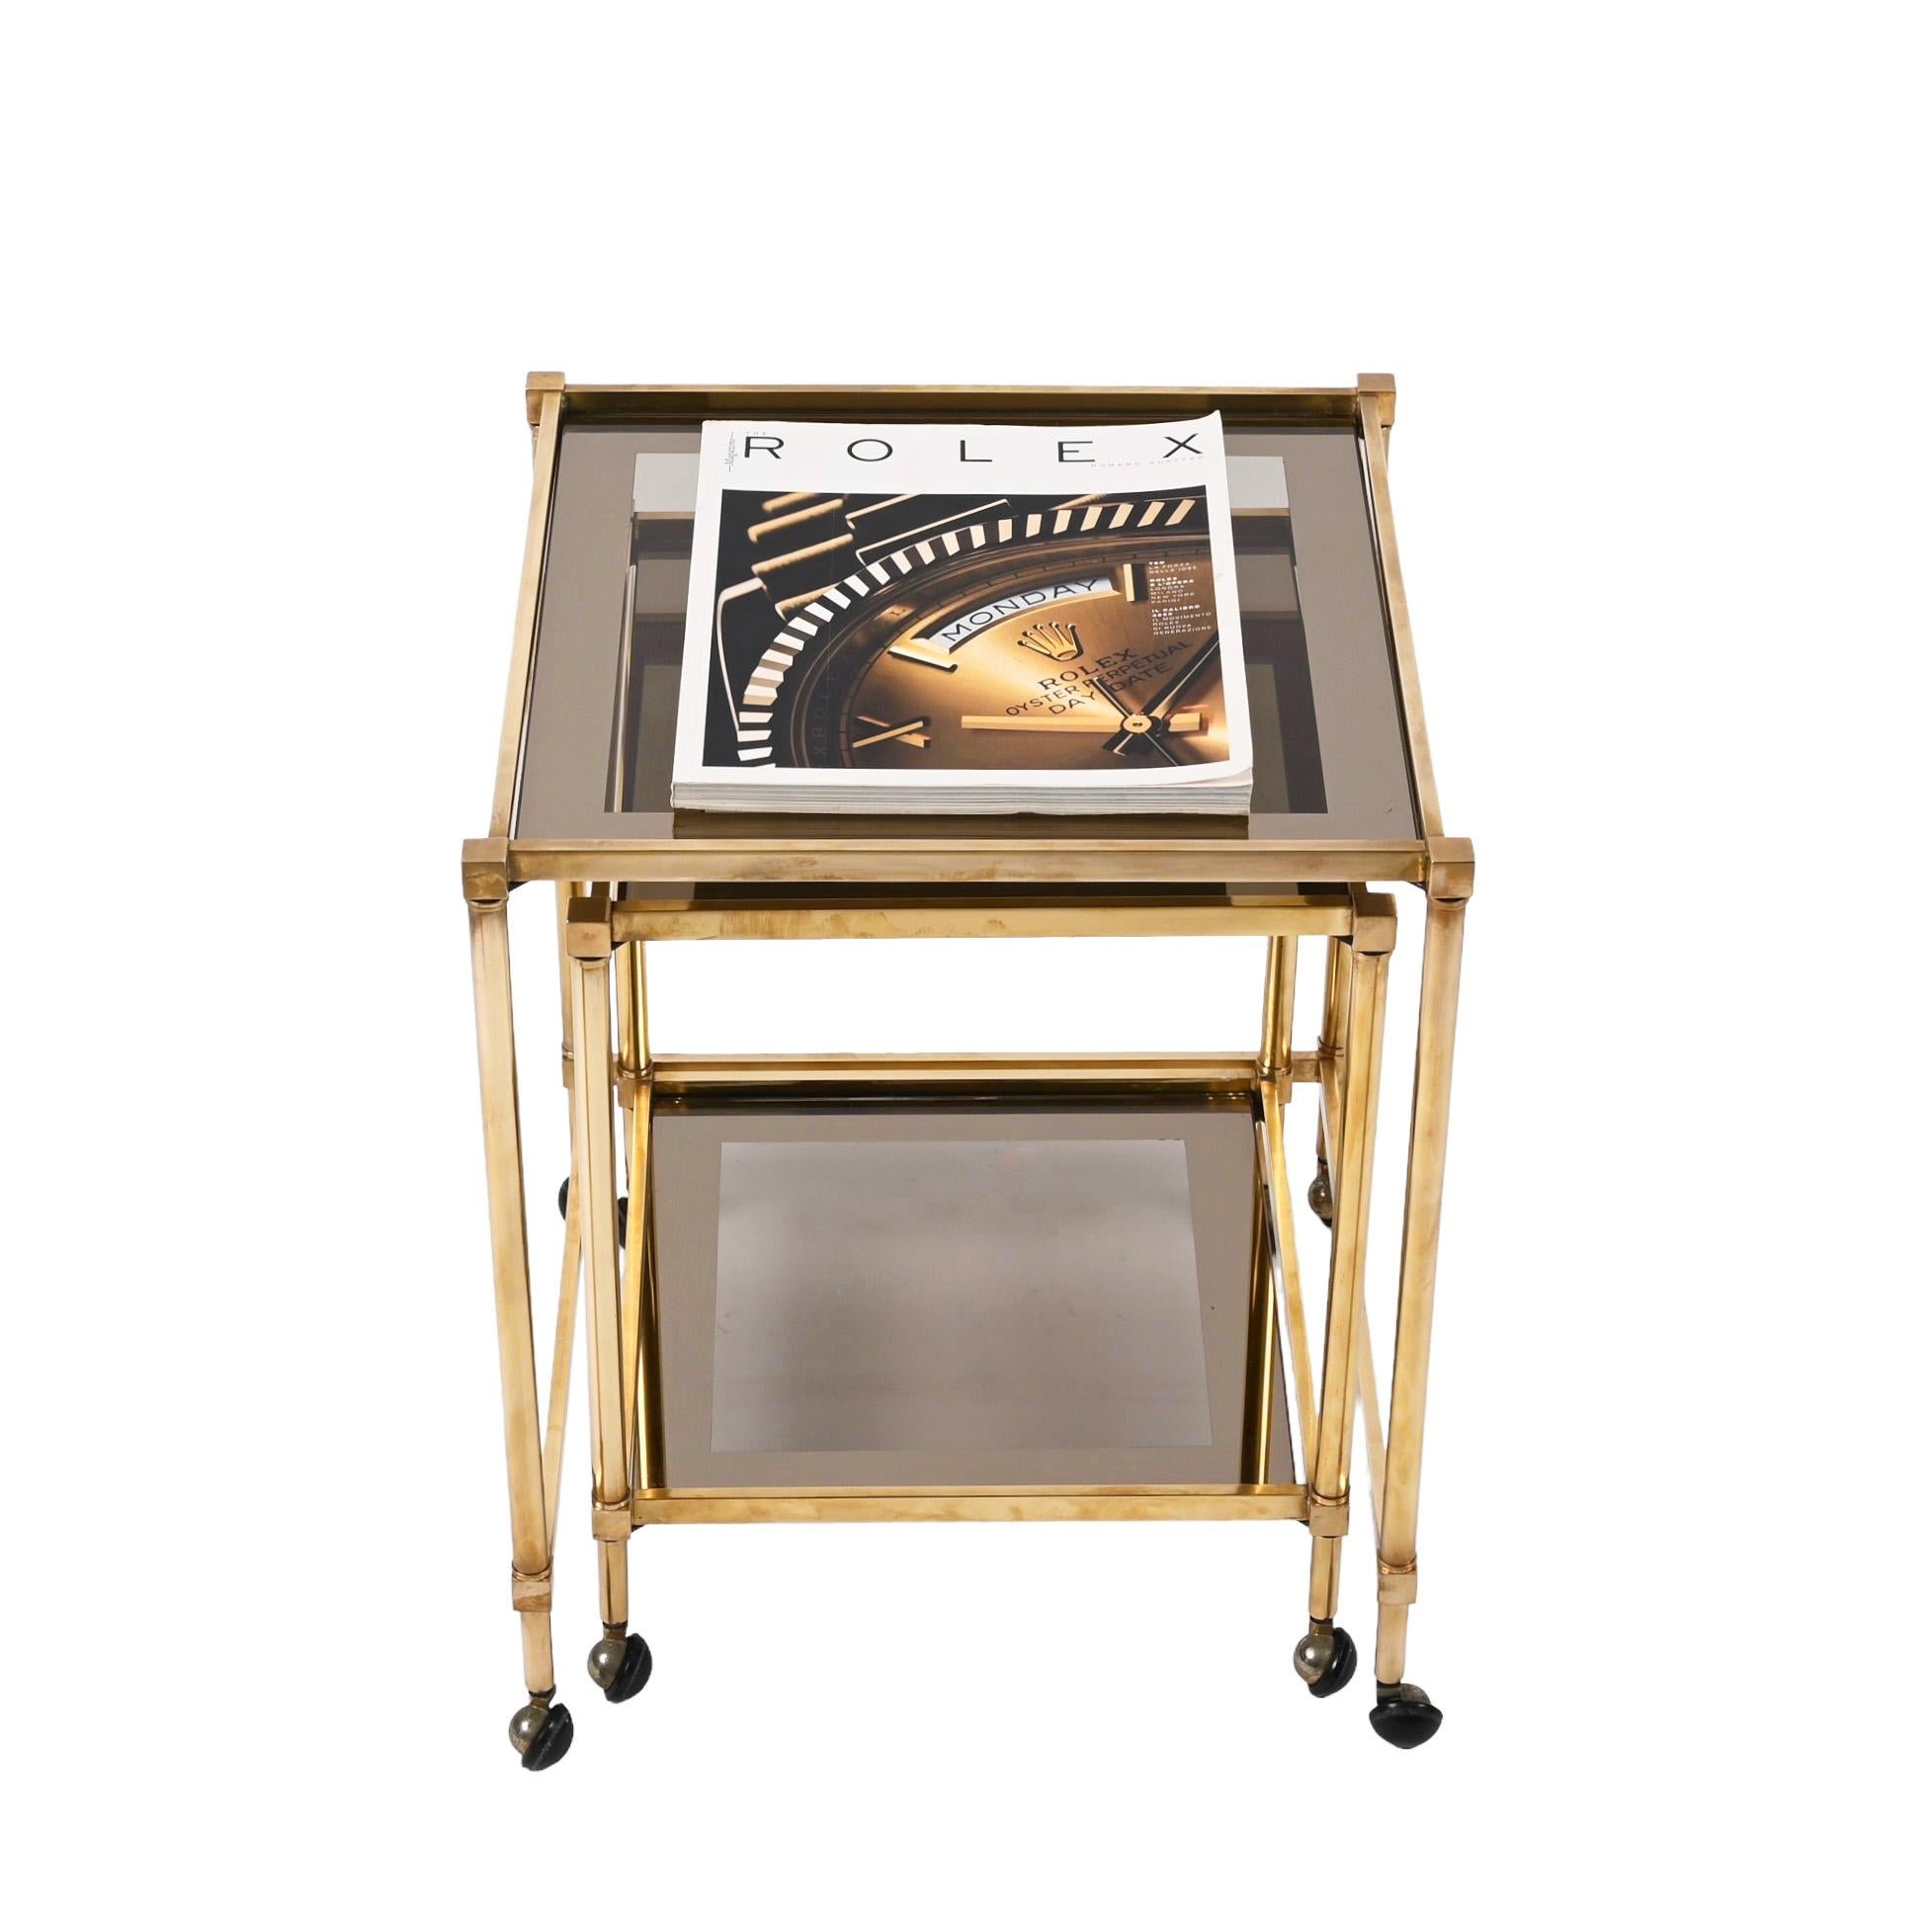 Pair of Maison Jansen Brass Mirrored Border Nesting Tables with Glass Top, 1970s For Sale 12